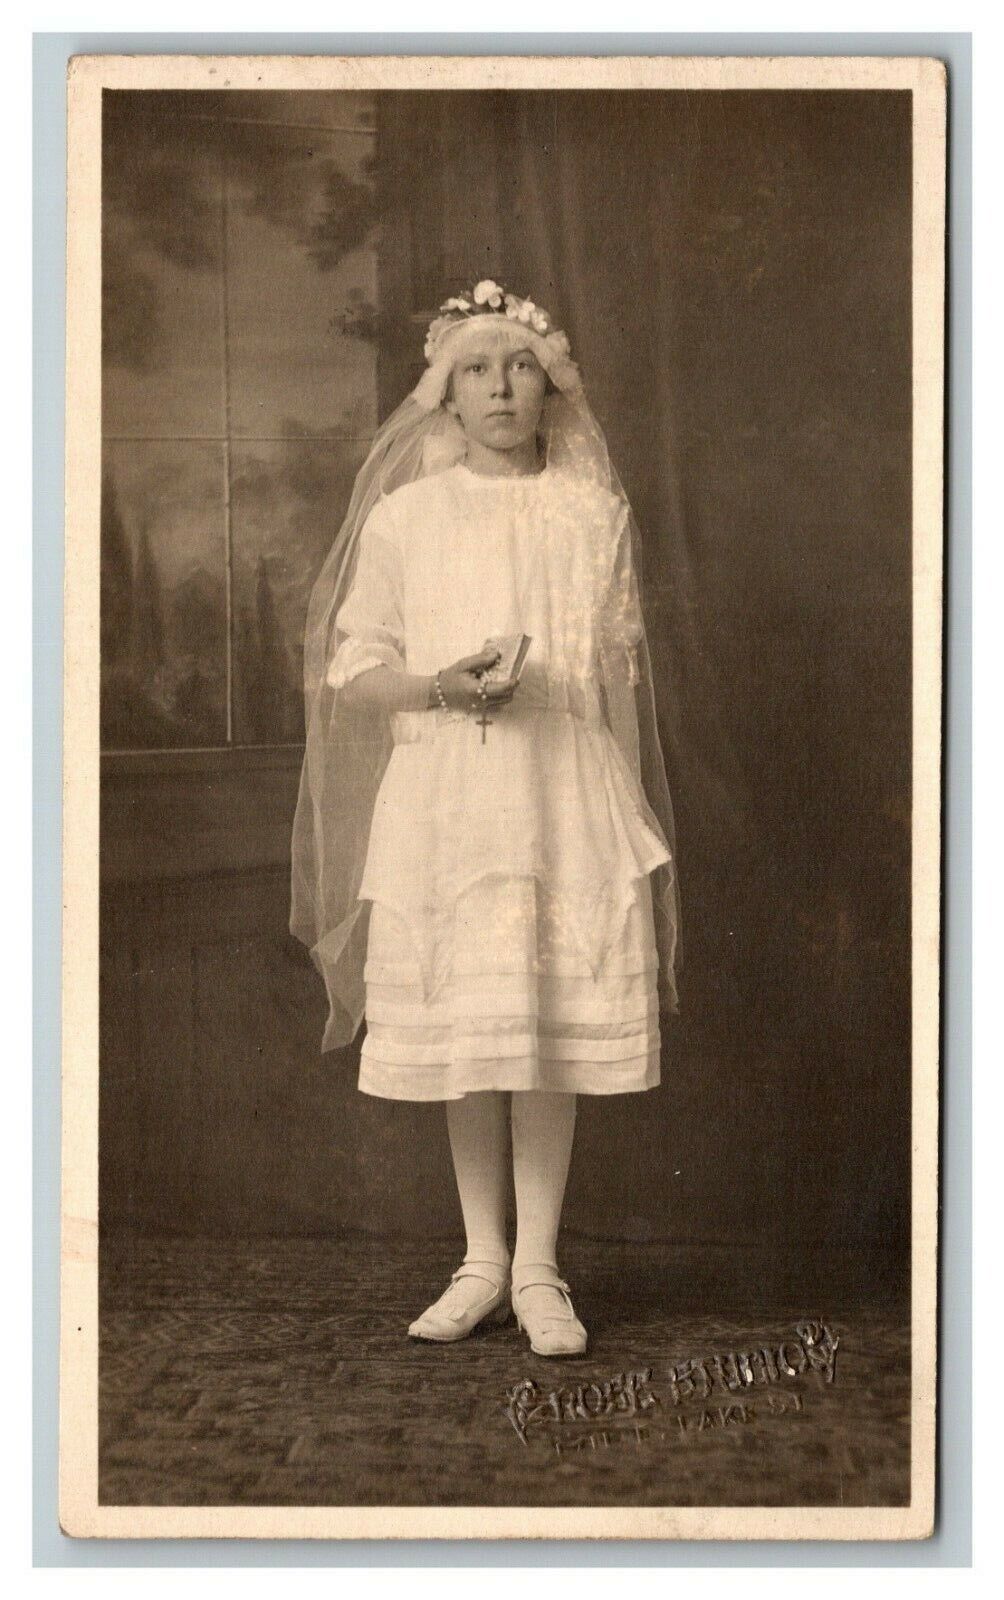 Vintage 1910's RPPC Postcard - Young Girl in Confirmation Dress